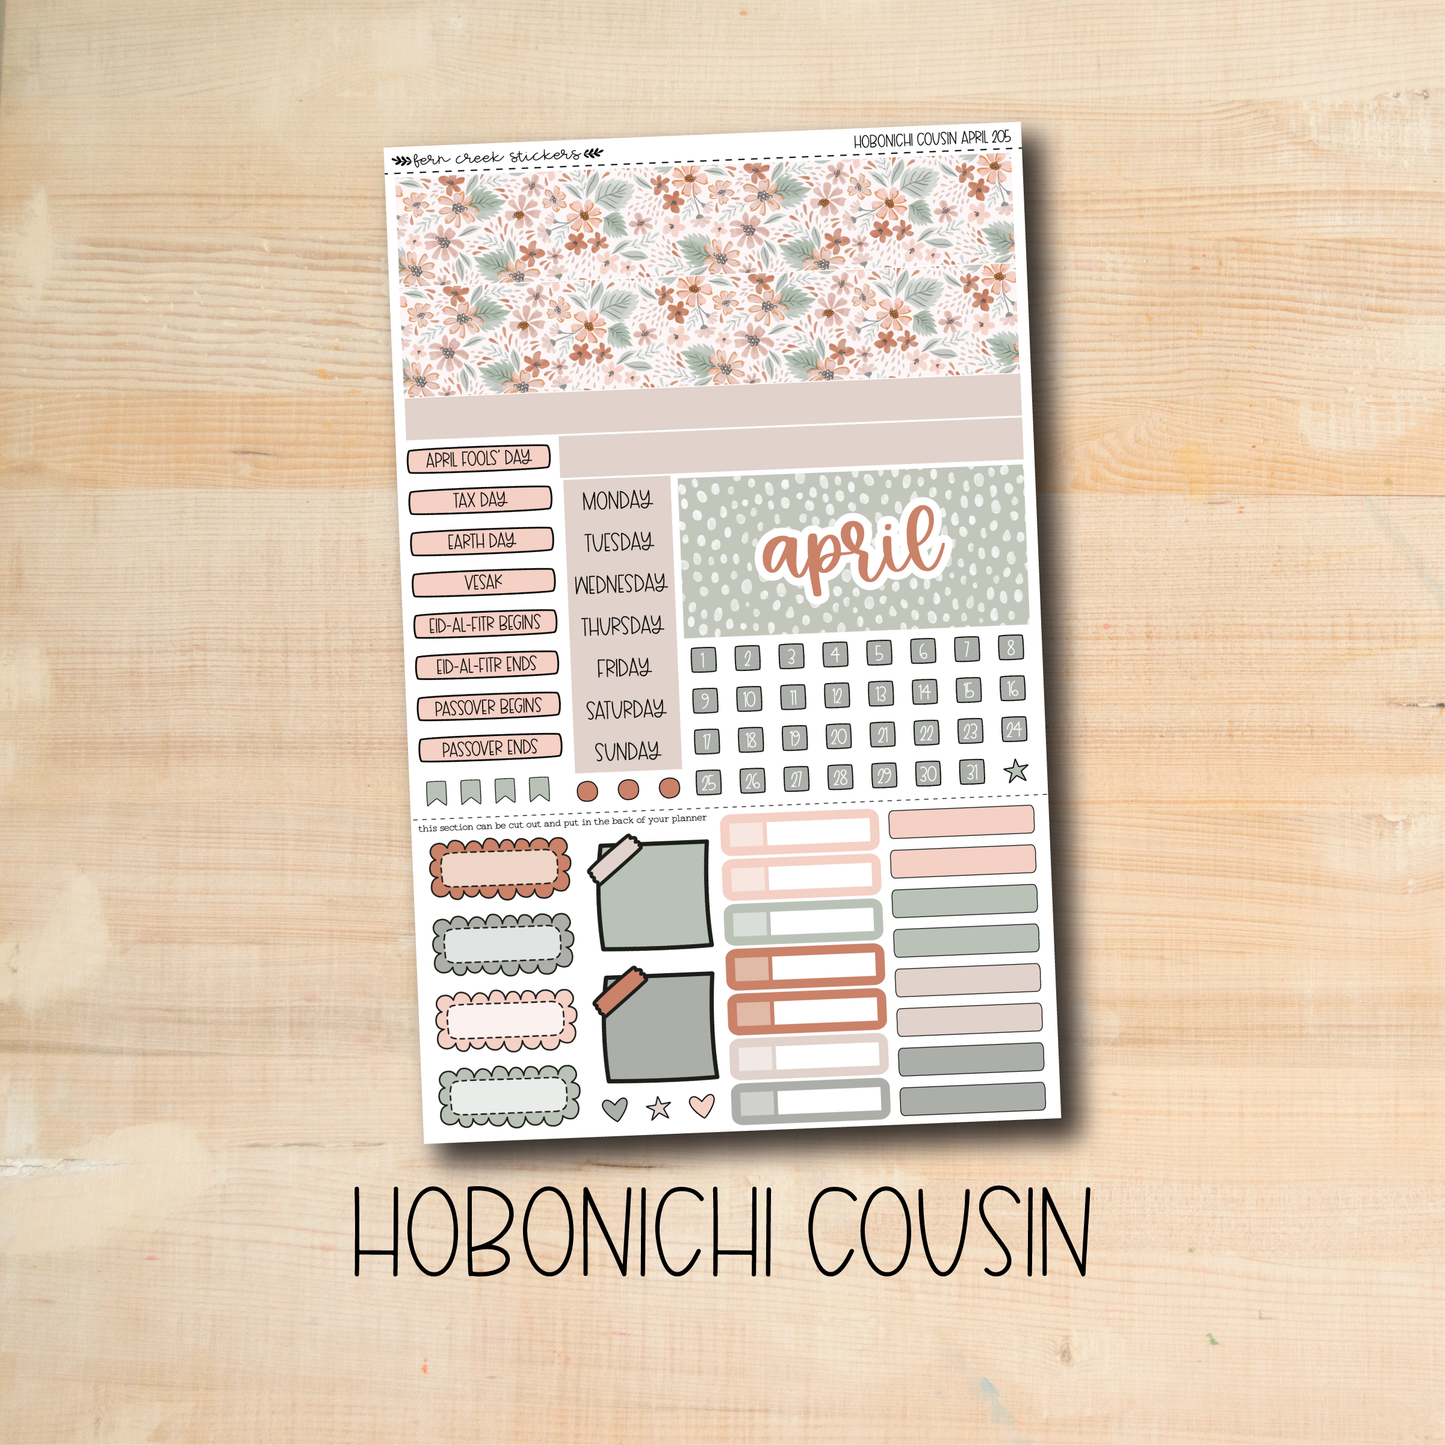 the hobonich cousin sticker sheet is displayed on a wooden surface